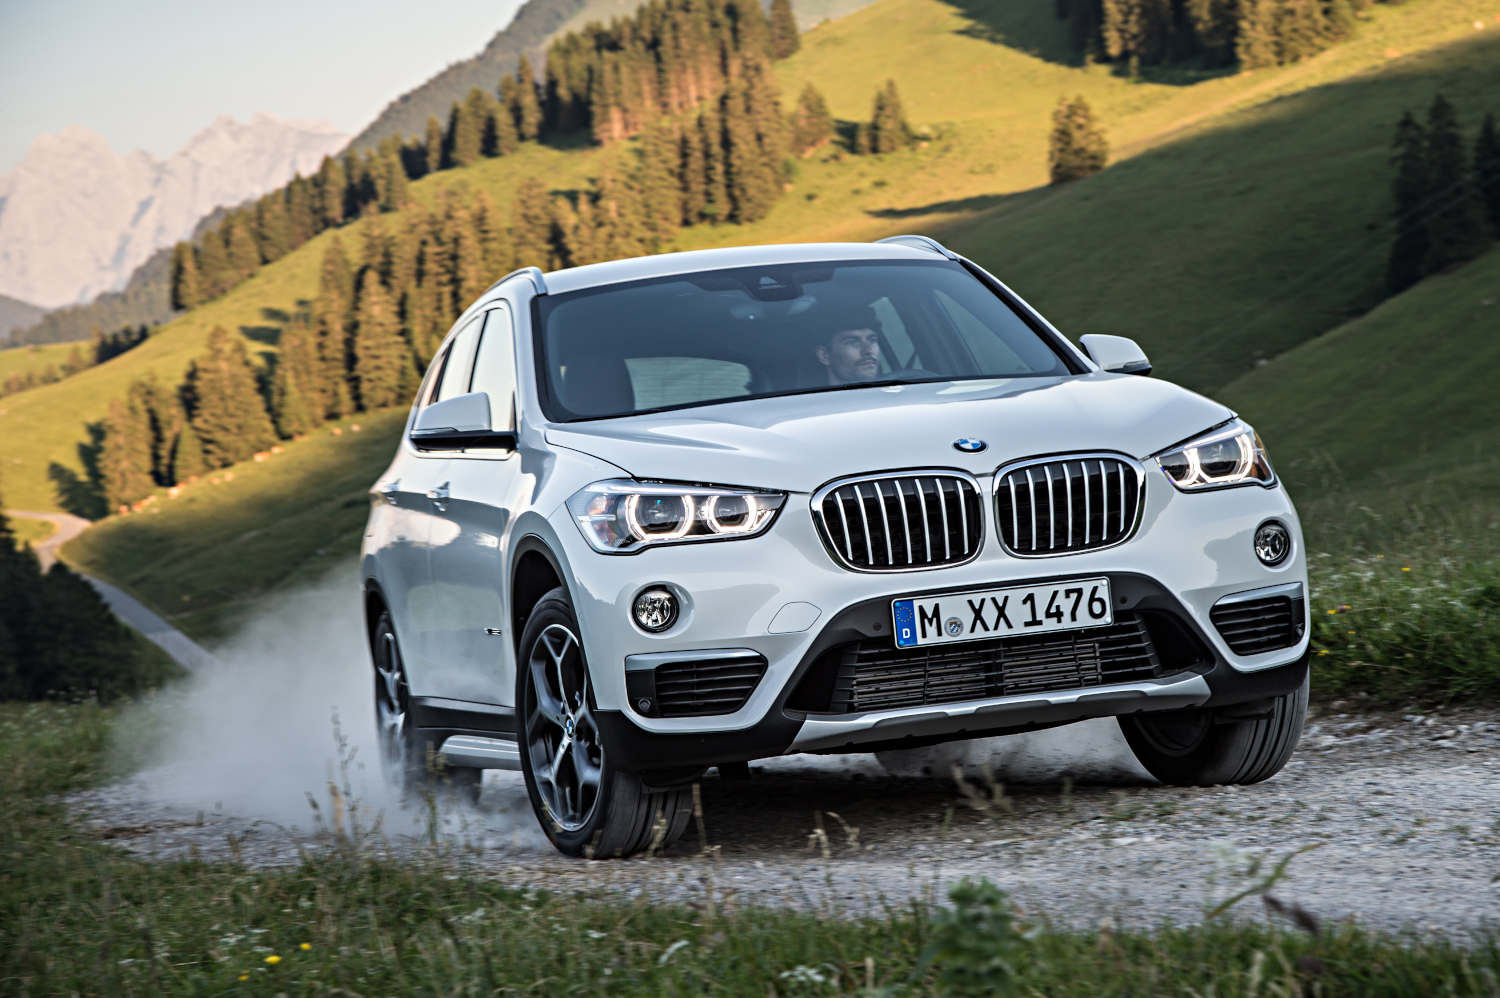 The best used luxury SUVs come from BMW